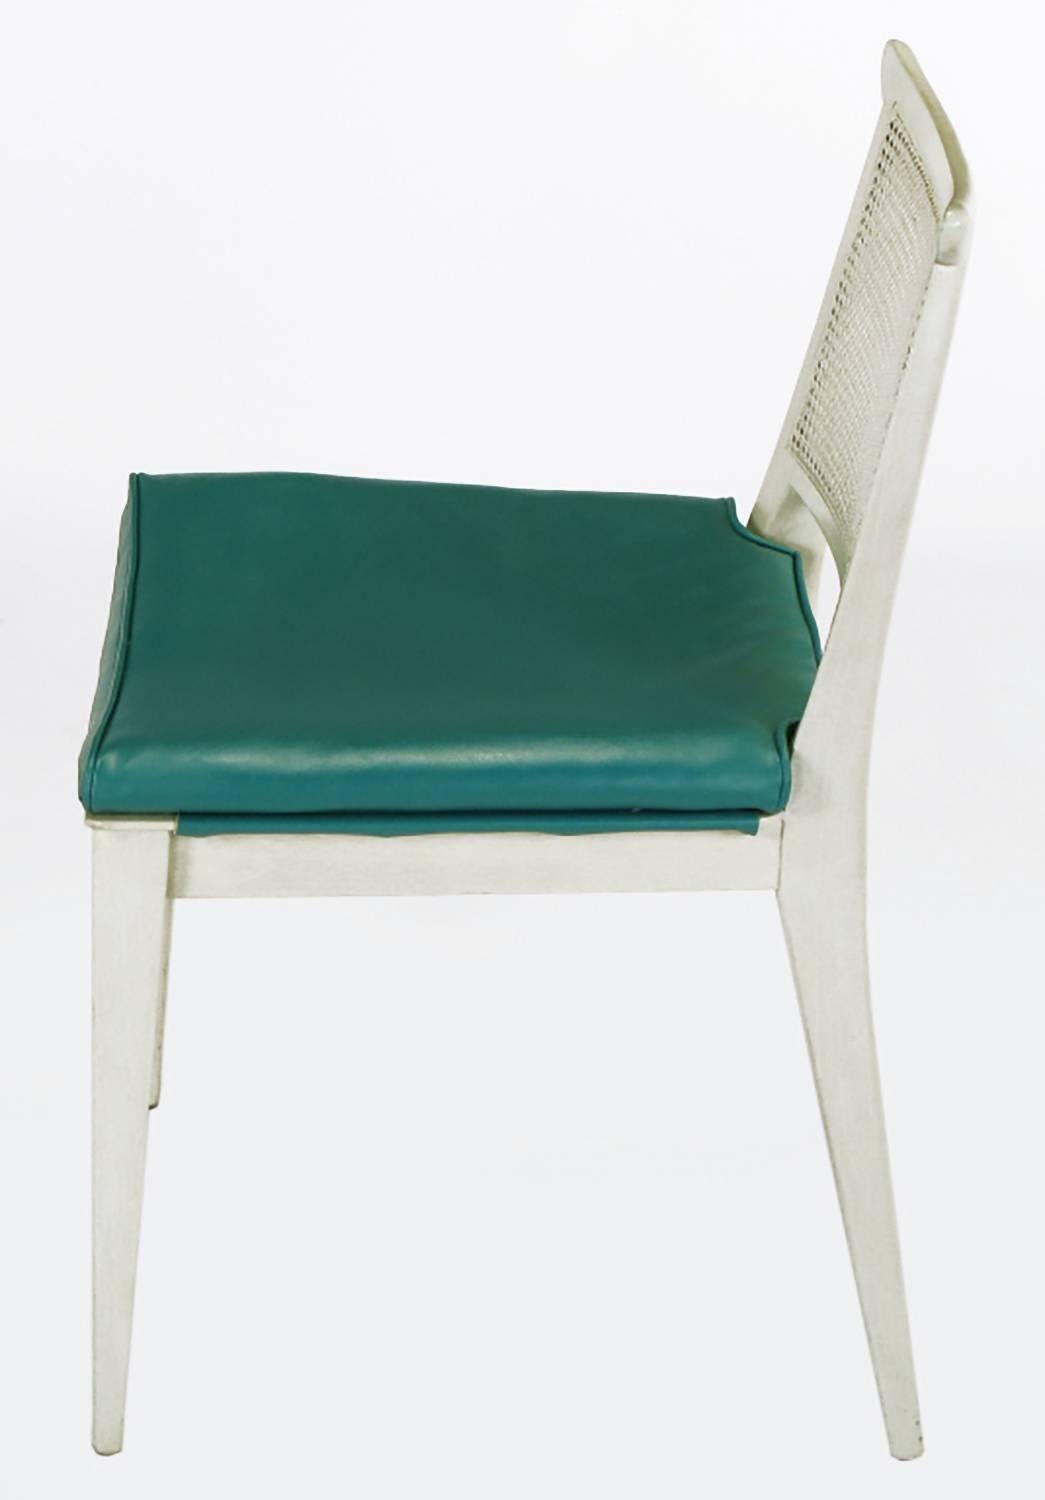 Bleched and off-white glazed mahogany side chair #4632, with turquoise vinyl covered seat and caned back by Edward Wormley for Dunbar. Excellent side or occasional chair or desk chair, slight Asian styling with yoke topped back. Unexpected front and